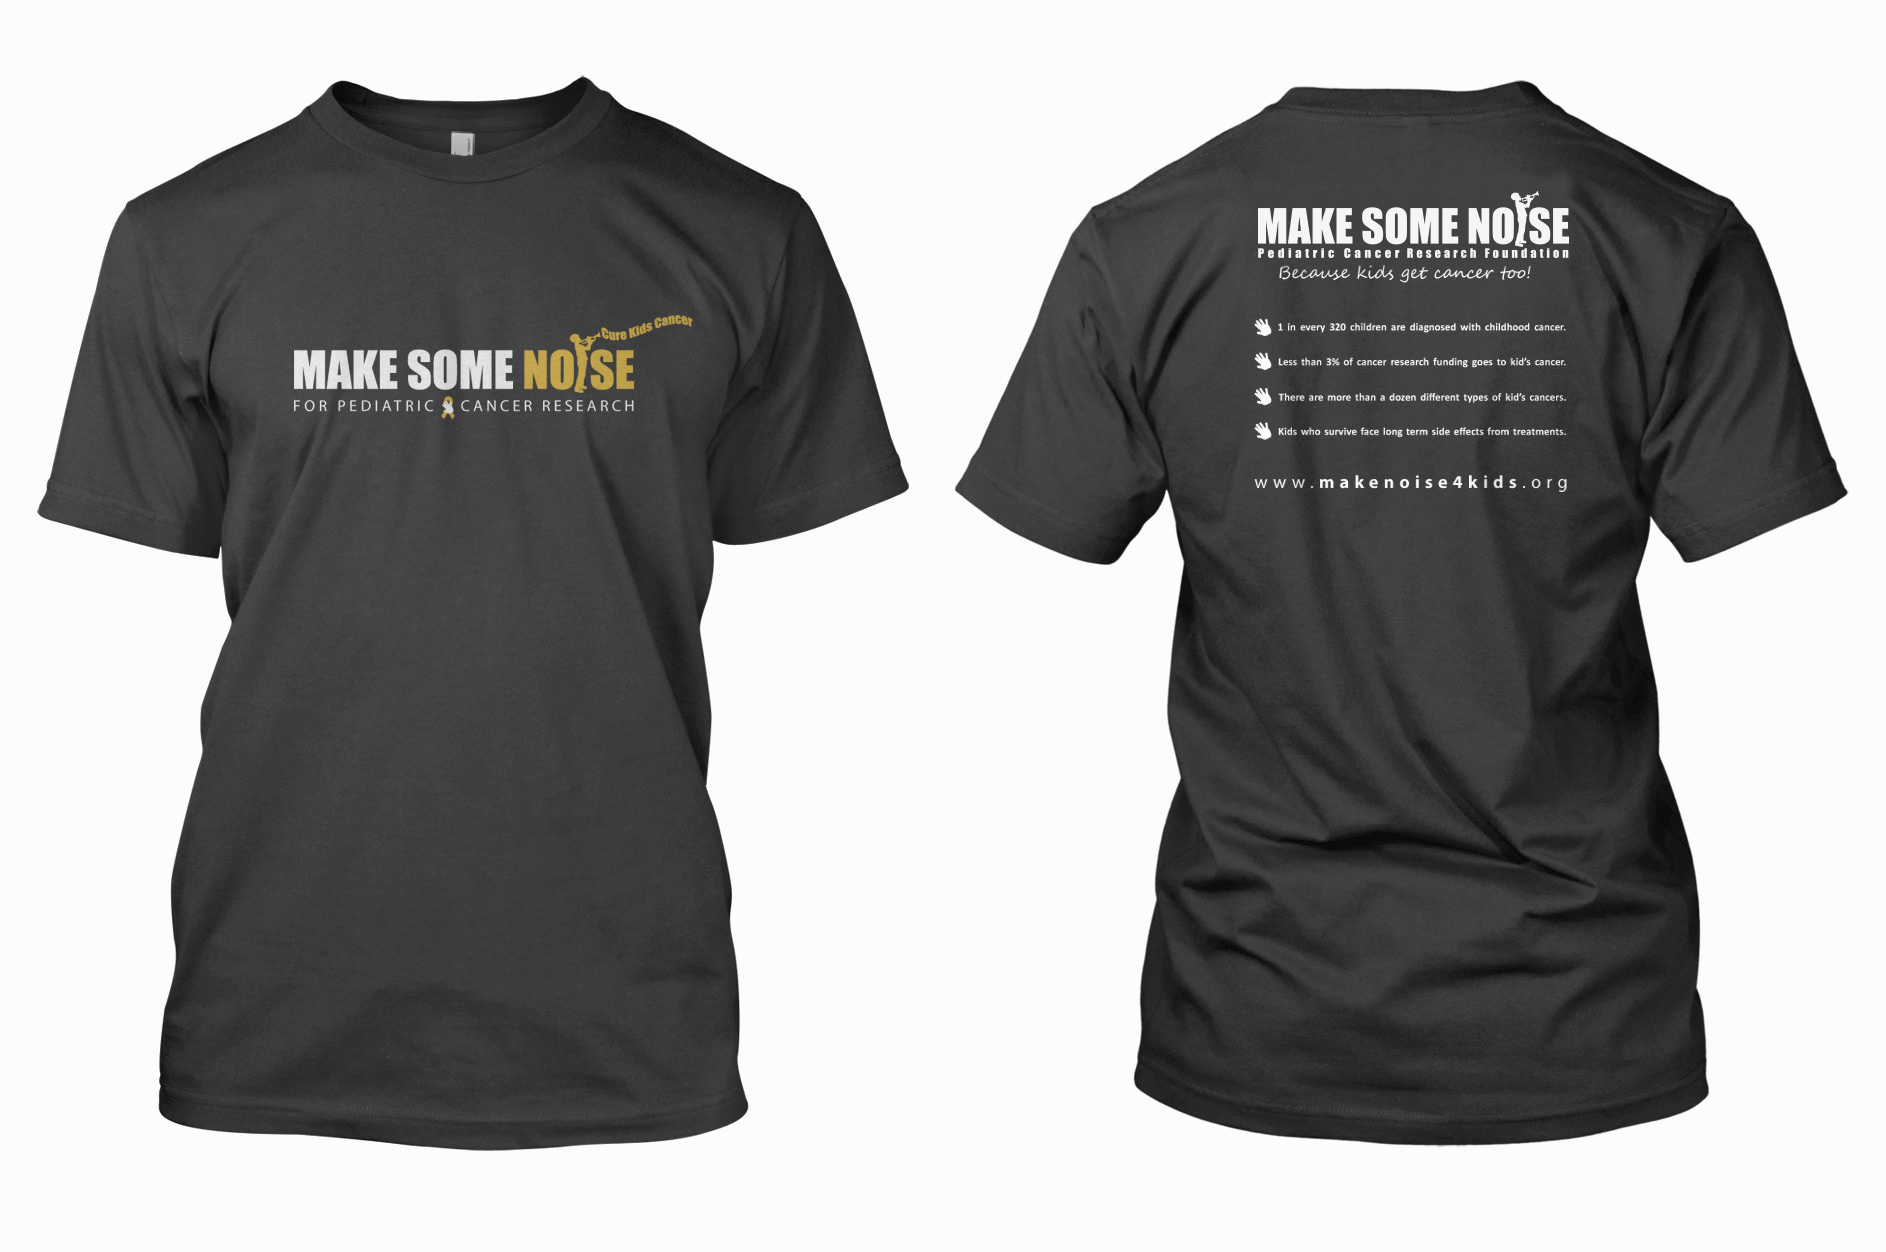 Make Some Noise T's in Grey